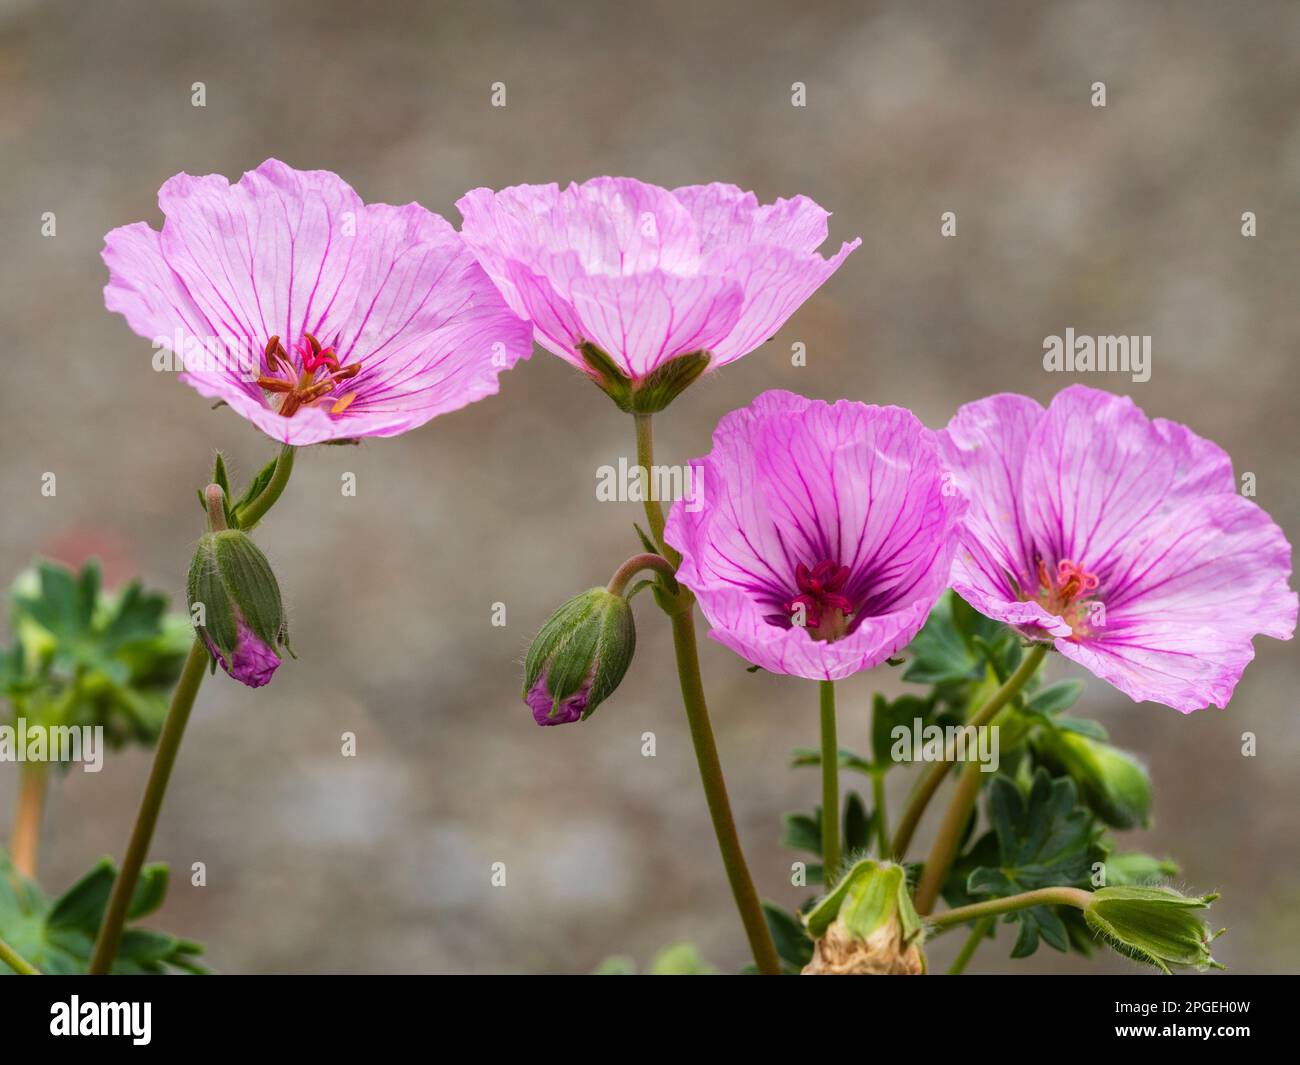 Pink flowers of the late spring to autumn blooming hardy, clump forming perennial, Geranium 'Sateene' Stock Photo